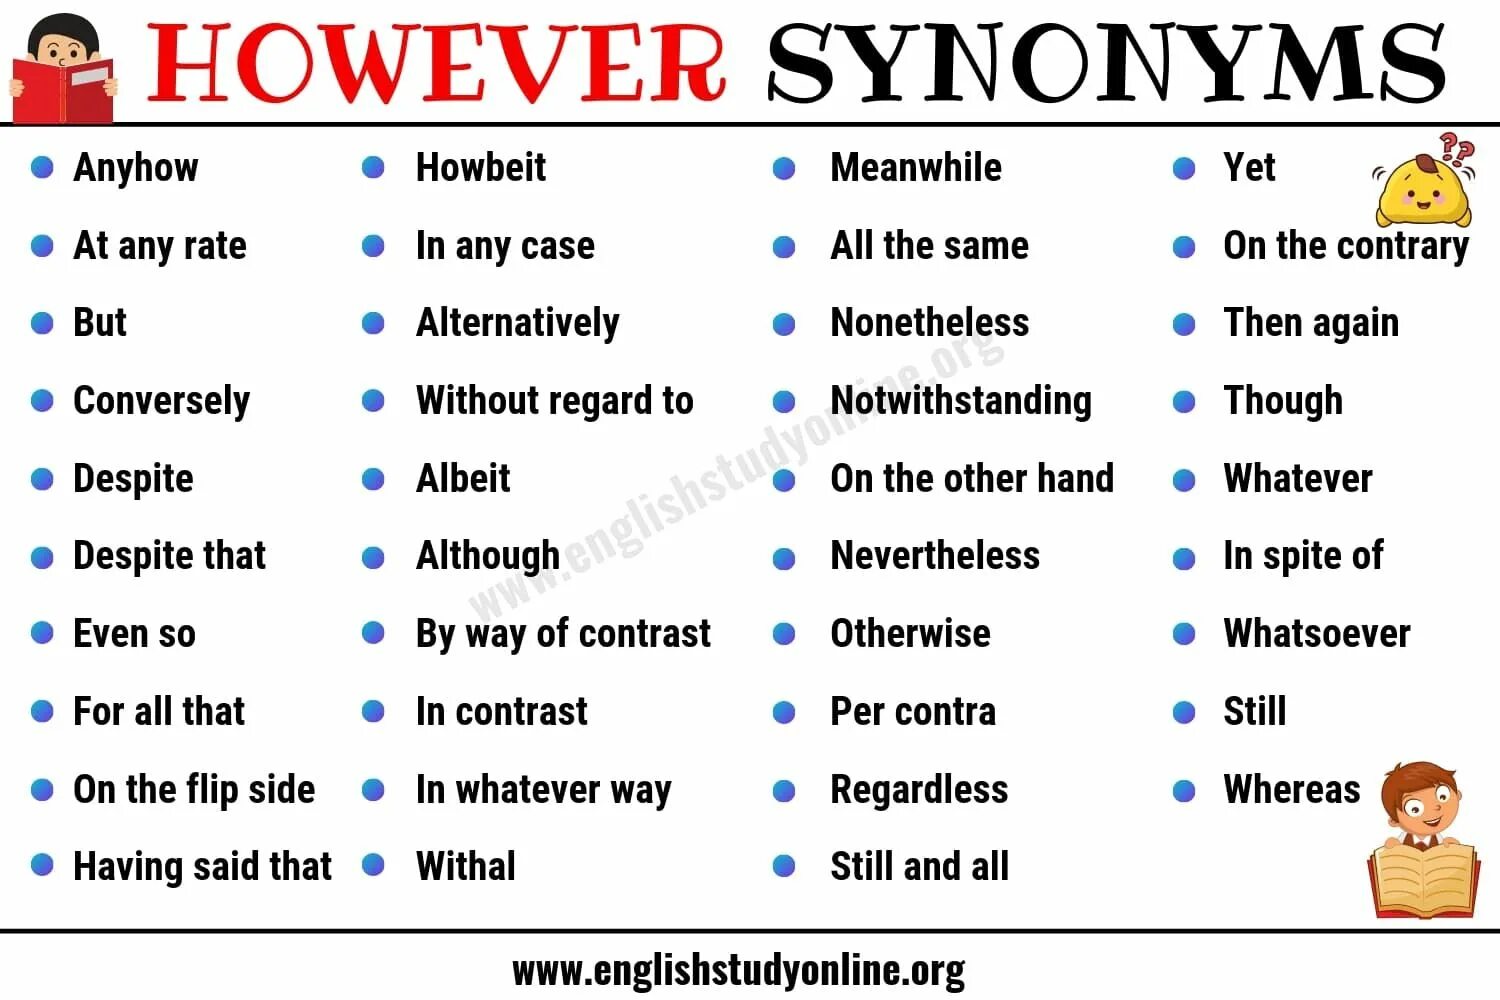 However synonyms. However в английском языке. However синонимы. But синонимы на английском. Fill in however whenever whichever